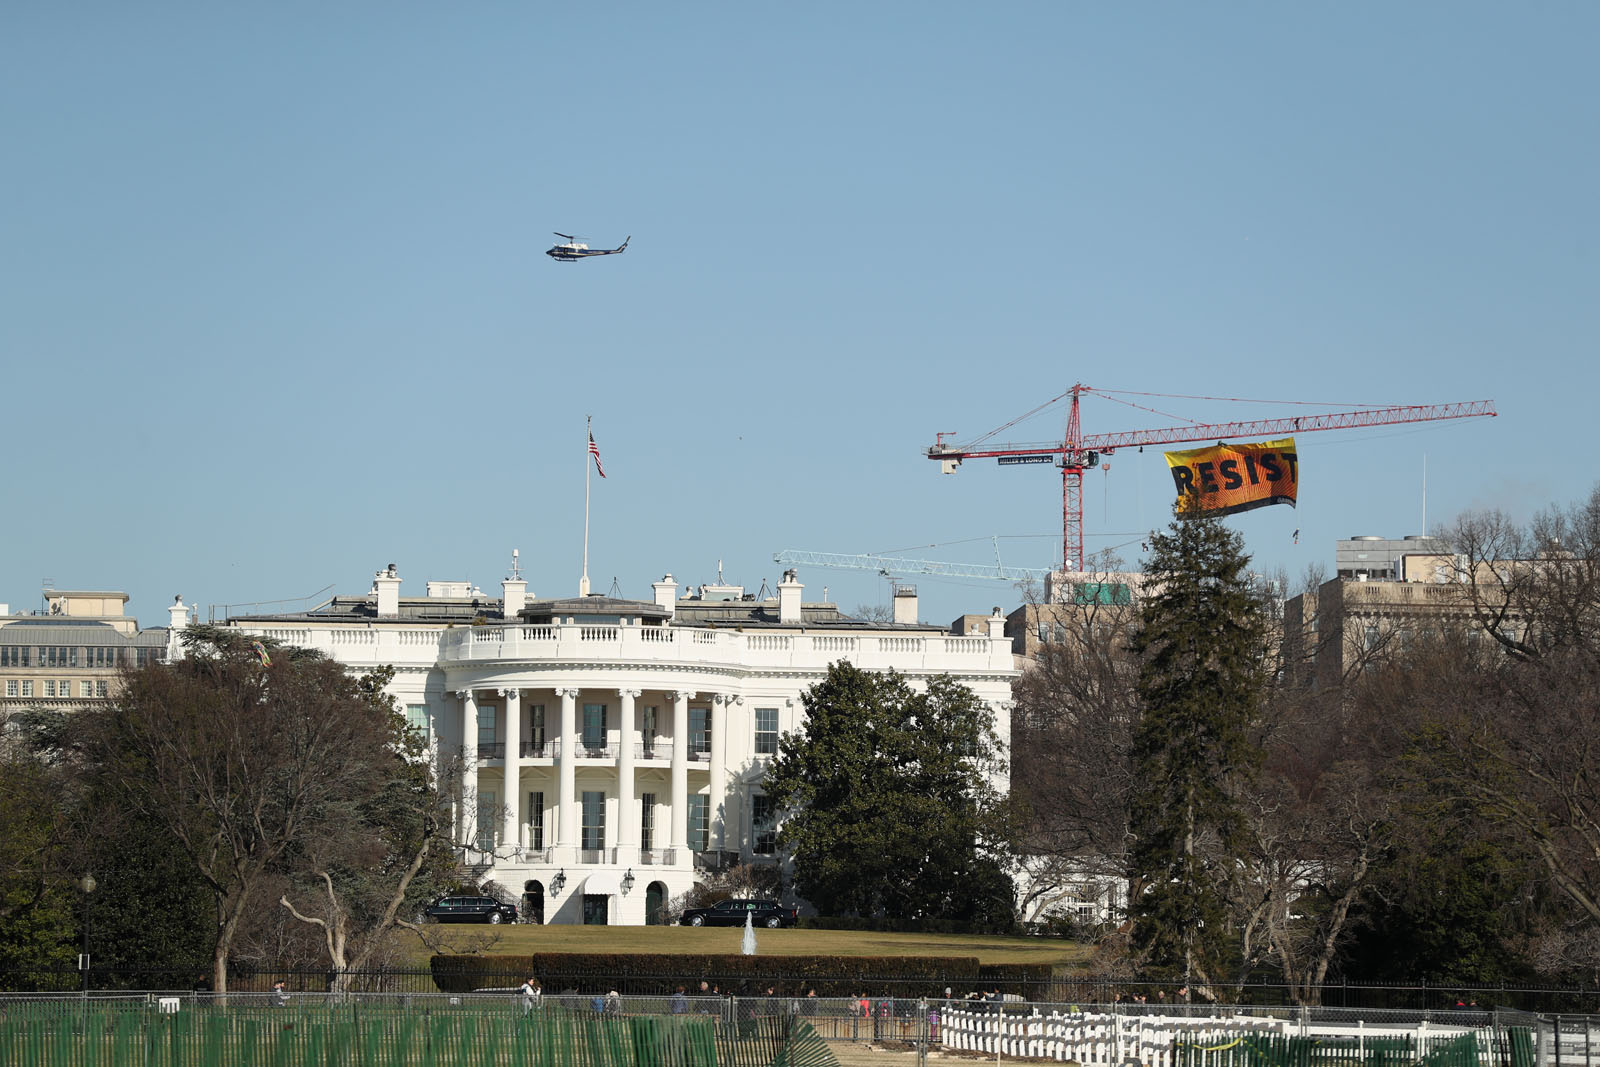 Greenpeace protesters unfurl a banner that reads "Resist" at the construction site of the former Washington Post building, near the White House in Washington, Wednesday, Jan. 25, 2017, after police say protesters climbed a crane at the site refusing to allow workers to work in the area.  (AP Photo/Andrew Harnik)